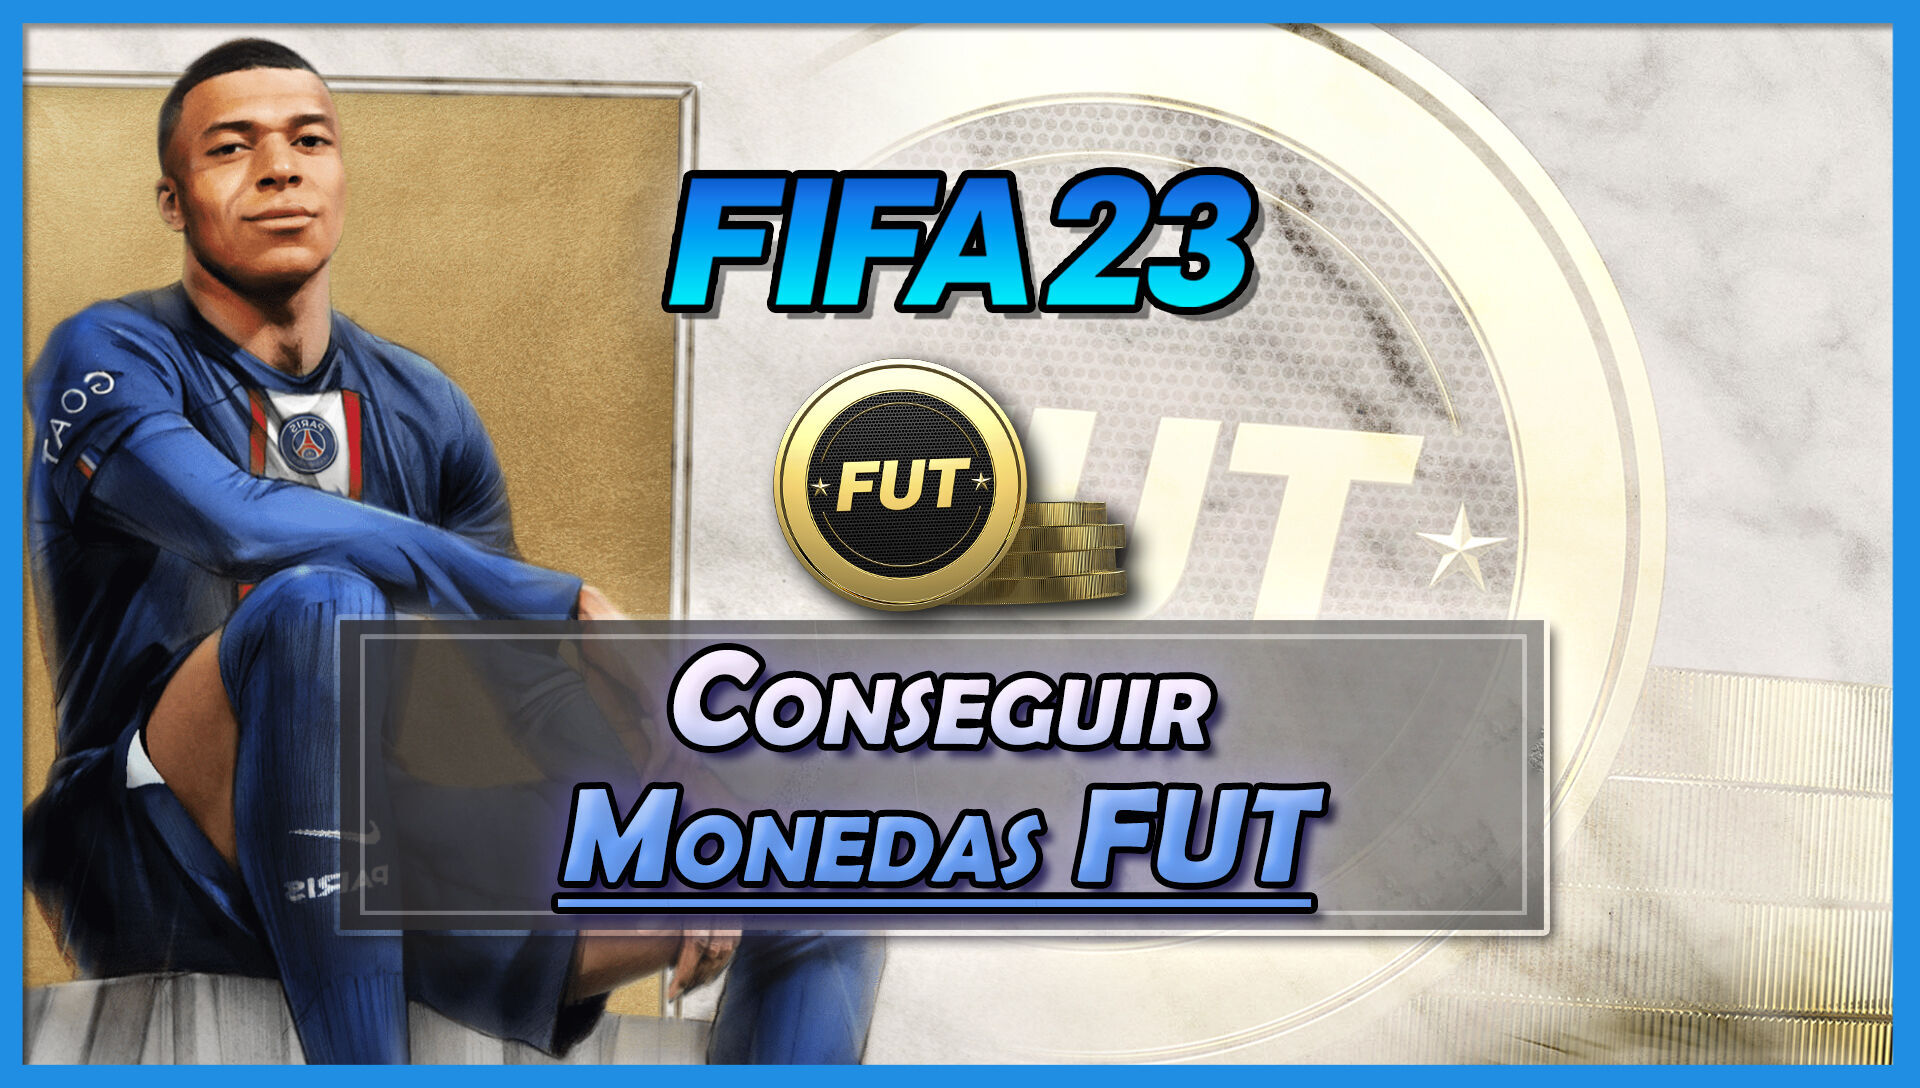 Rulebreakers - FIFA 23 Ultimate Team (FUT 23) - Electronic Arts Official